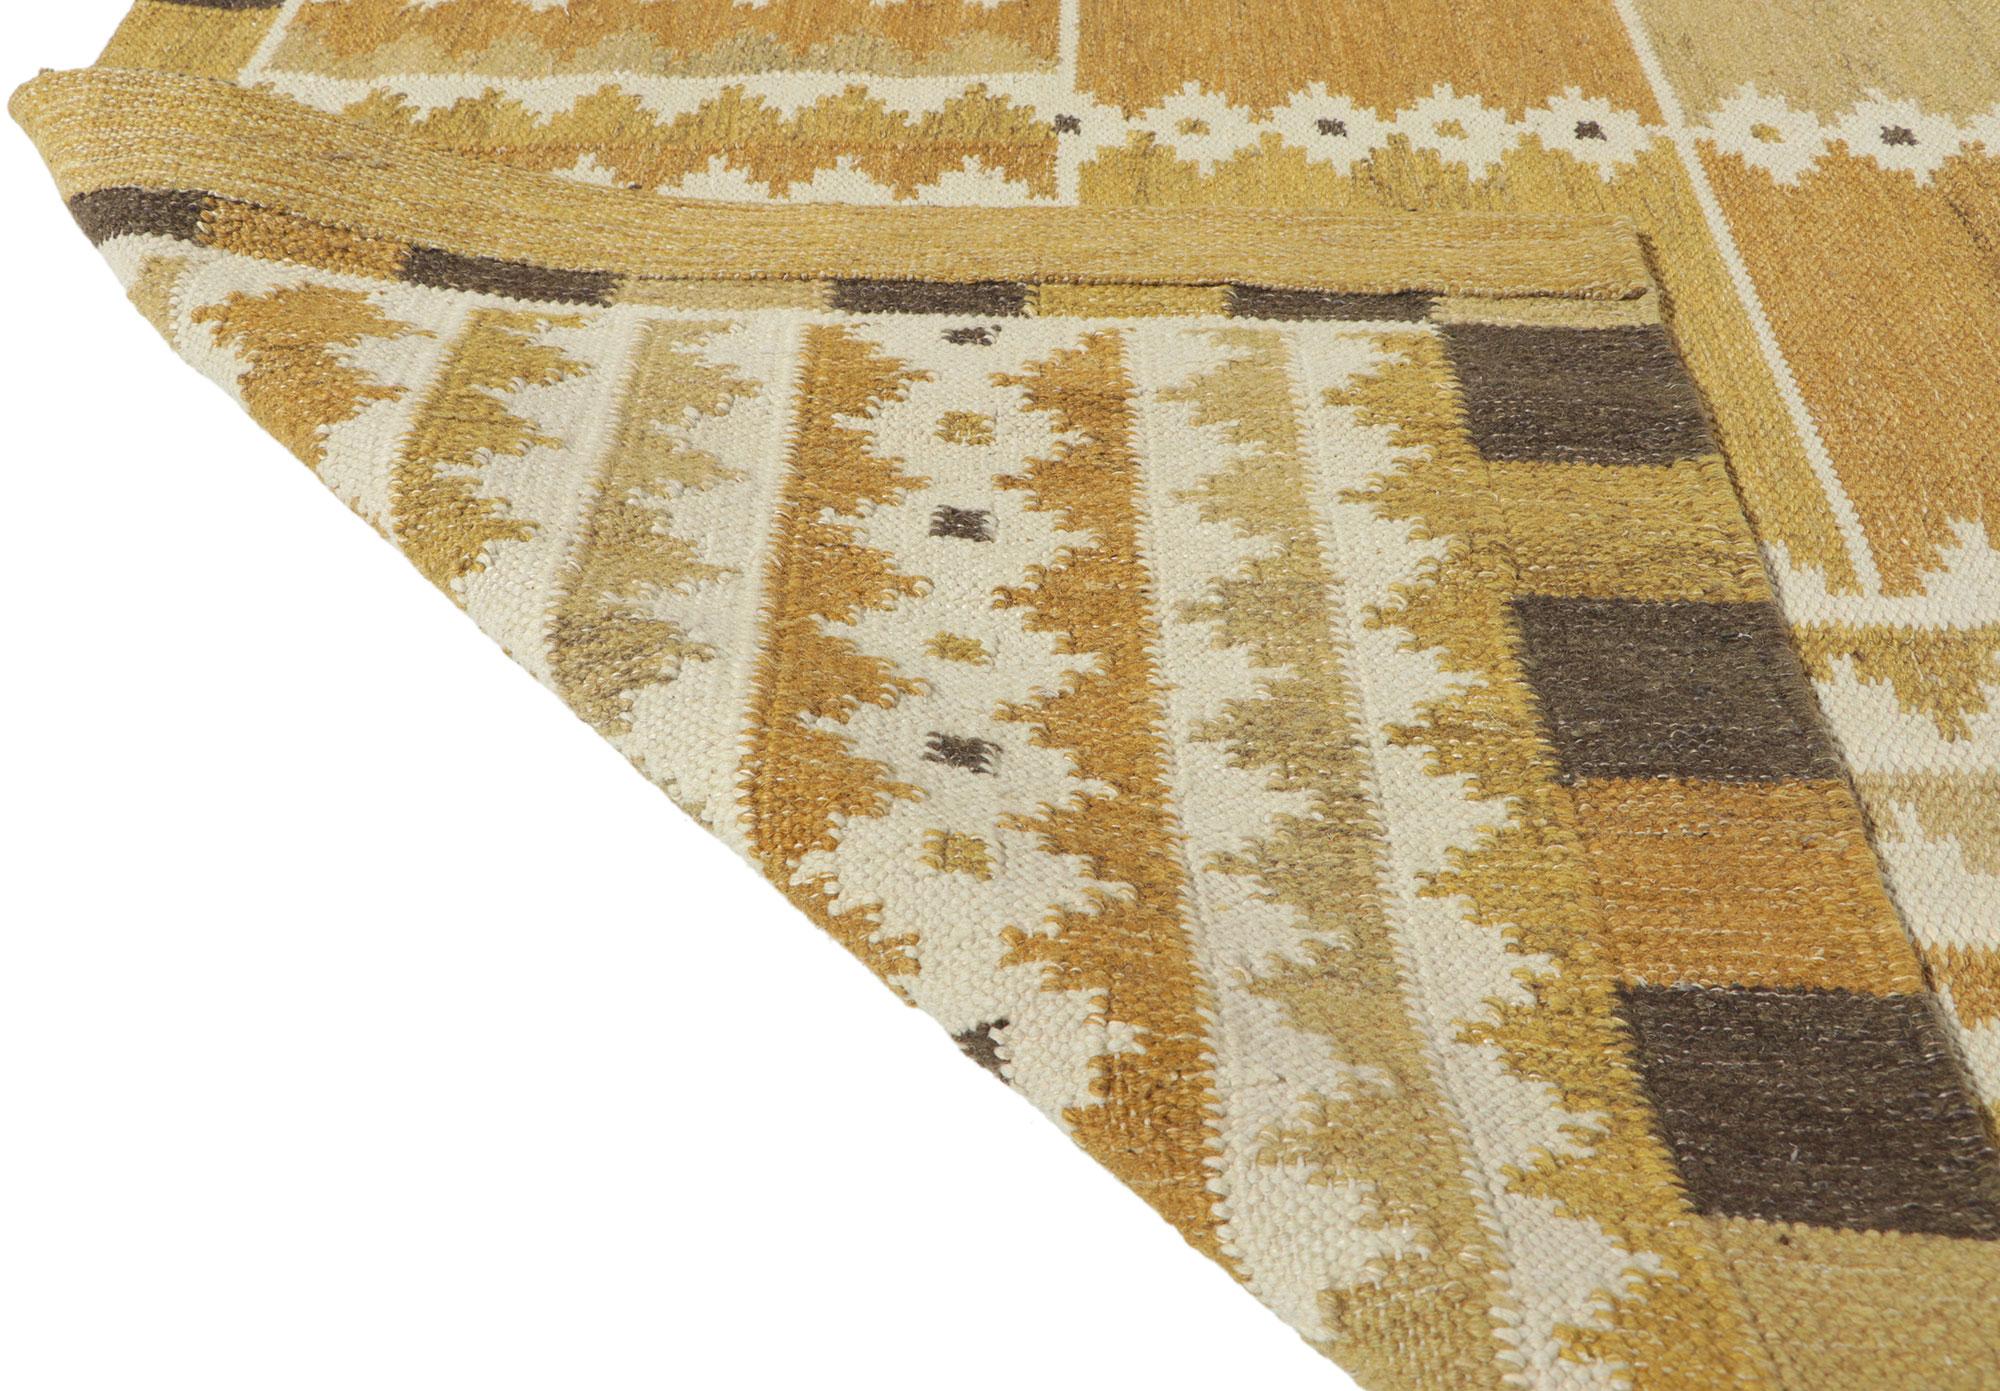 Hand-Woven New Swedish Style Kilim Rug Inspired by Marianne Richter and Barbro Nilsson